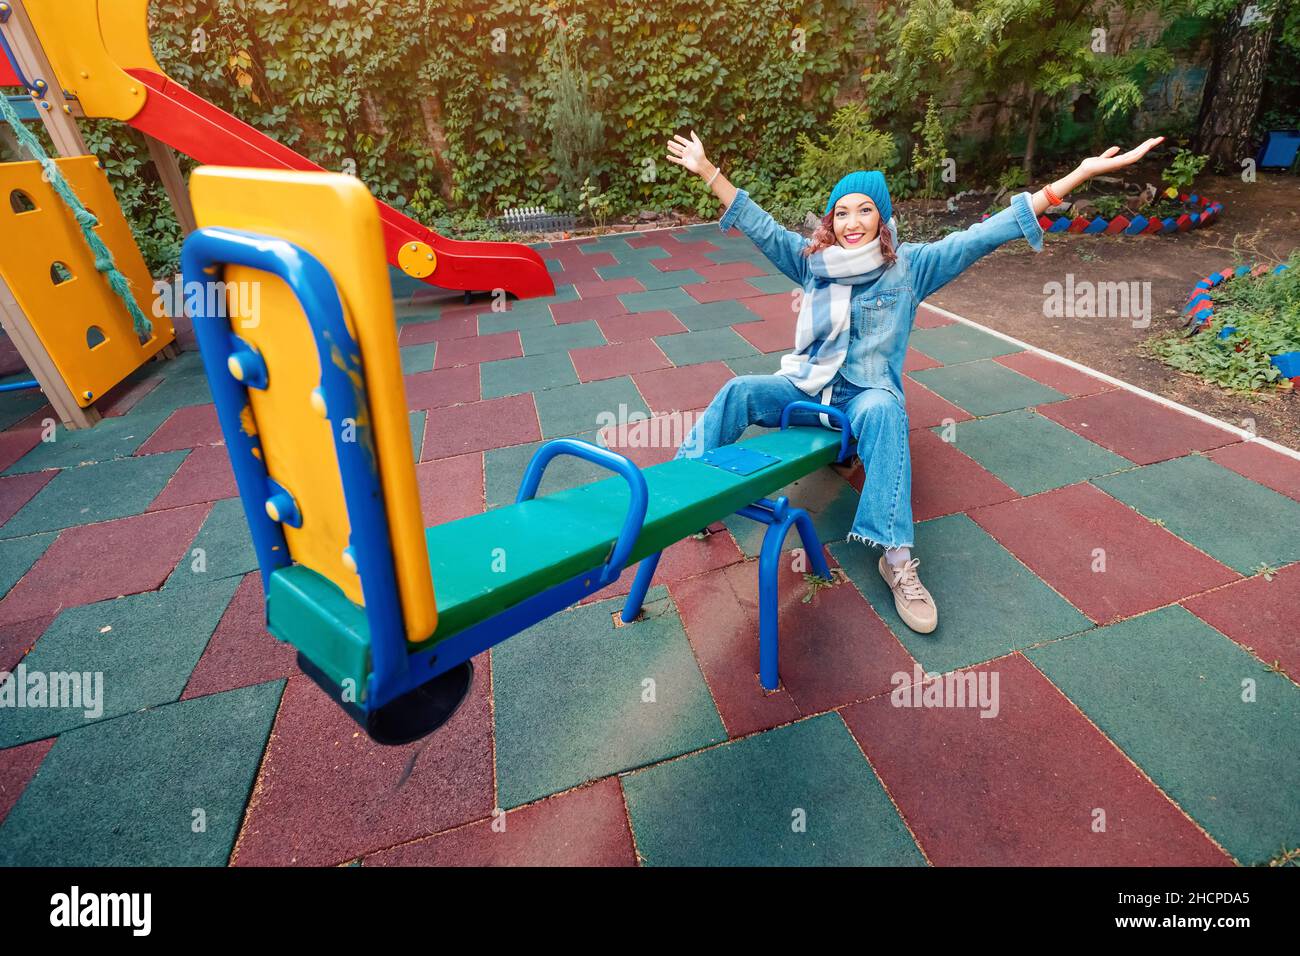 Infantile and childish happy woman or a teenage girl swings on seesaw. Concept of psychology and sociology of the new generation and growing up. Stock Photo